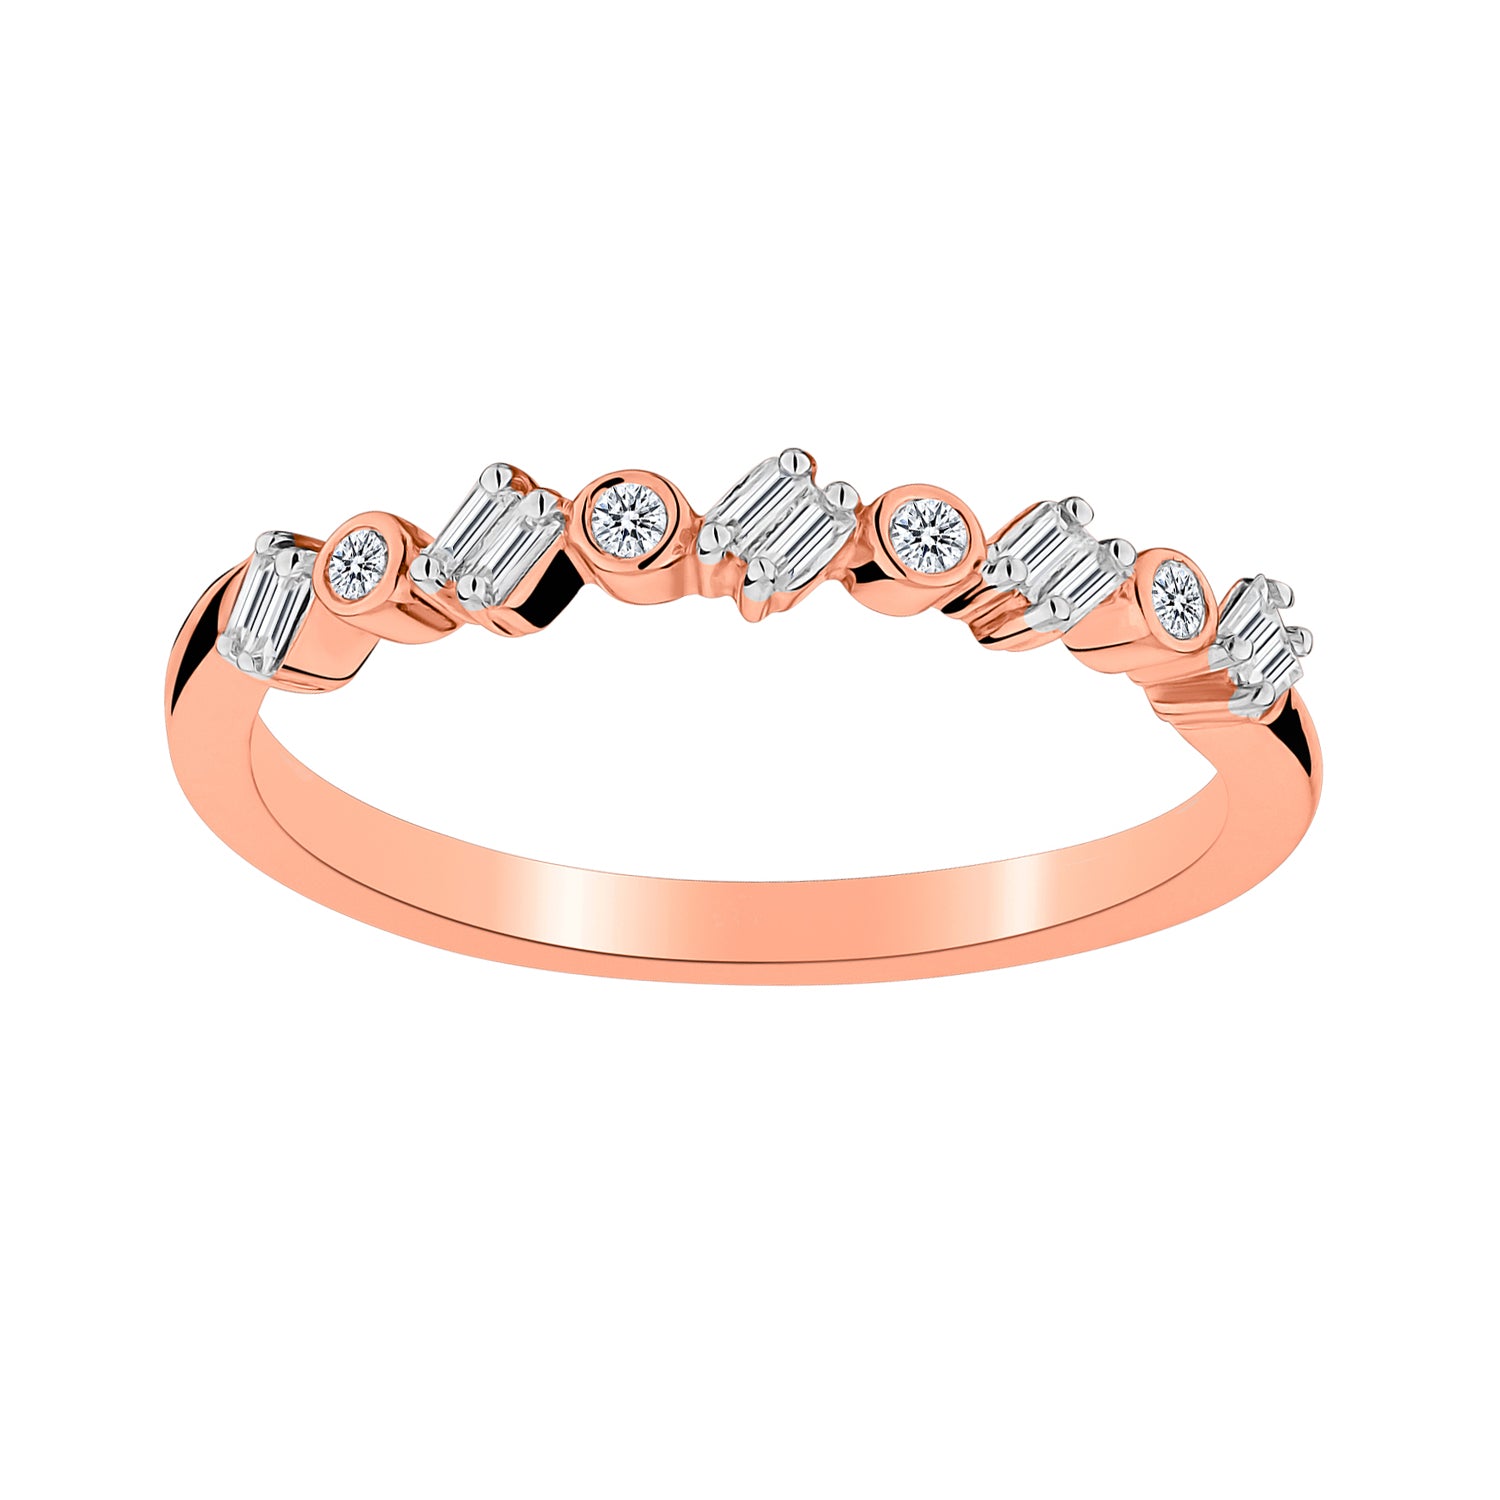 .12 CARAT DIAMOND BEZEL SET ROUND AND BAGUETTE STACKER RING, 10kt ROSE GOLD. Fashion Rings - Griffin Jewellery Designs